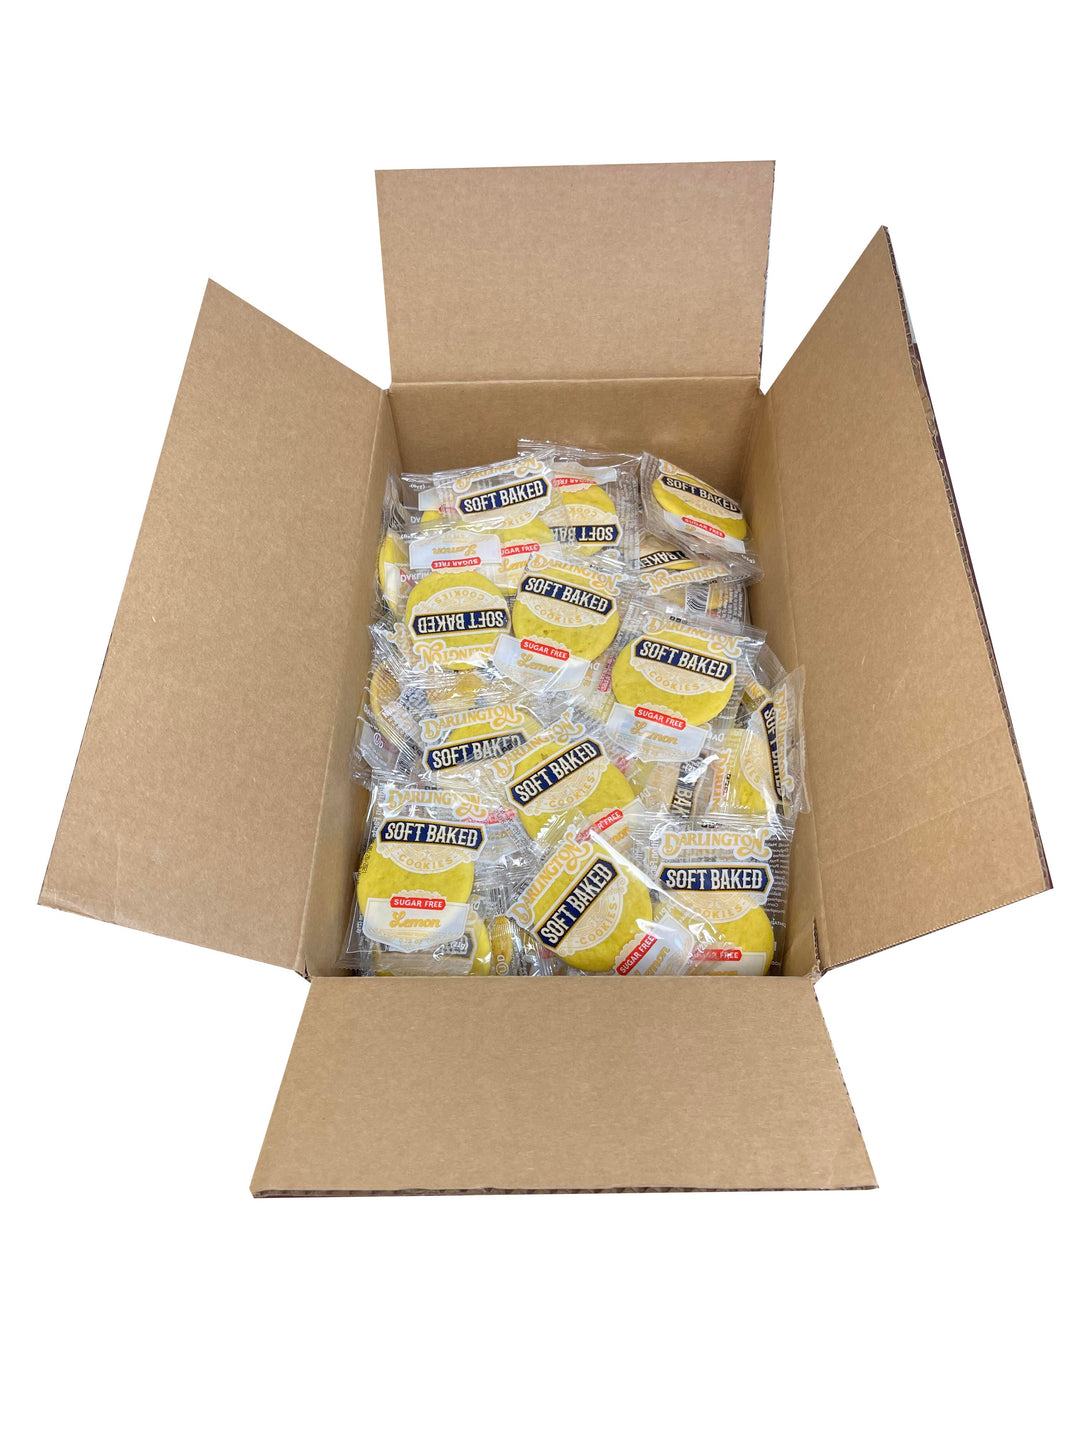 Darlington Sugar Free Individually Wrapped Lemon Cookie-1 Count-106/Case